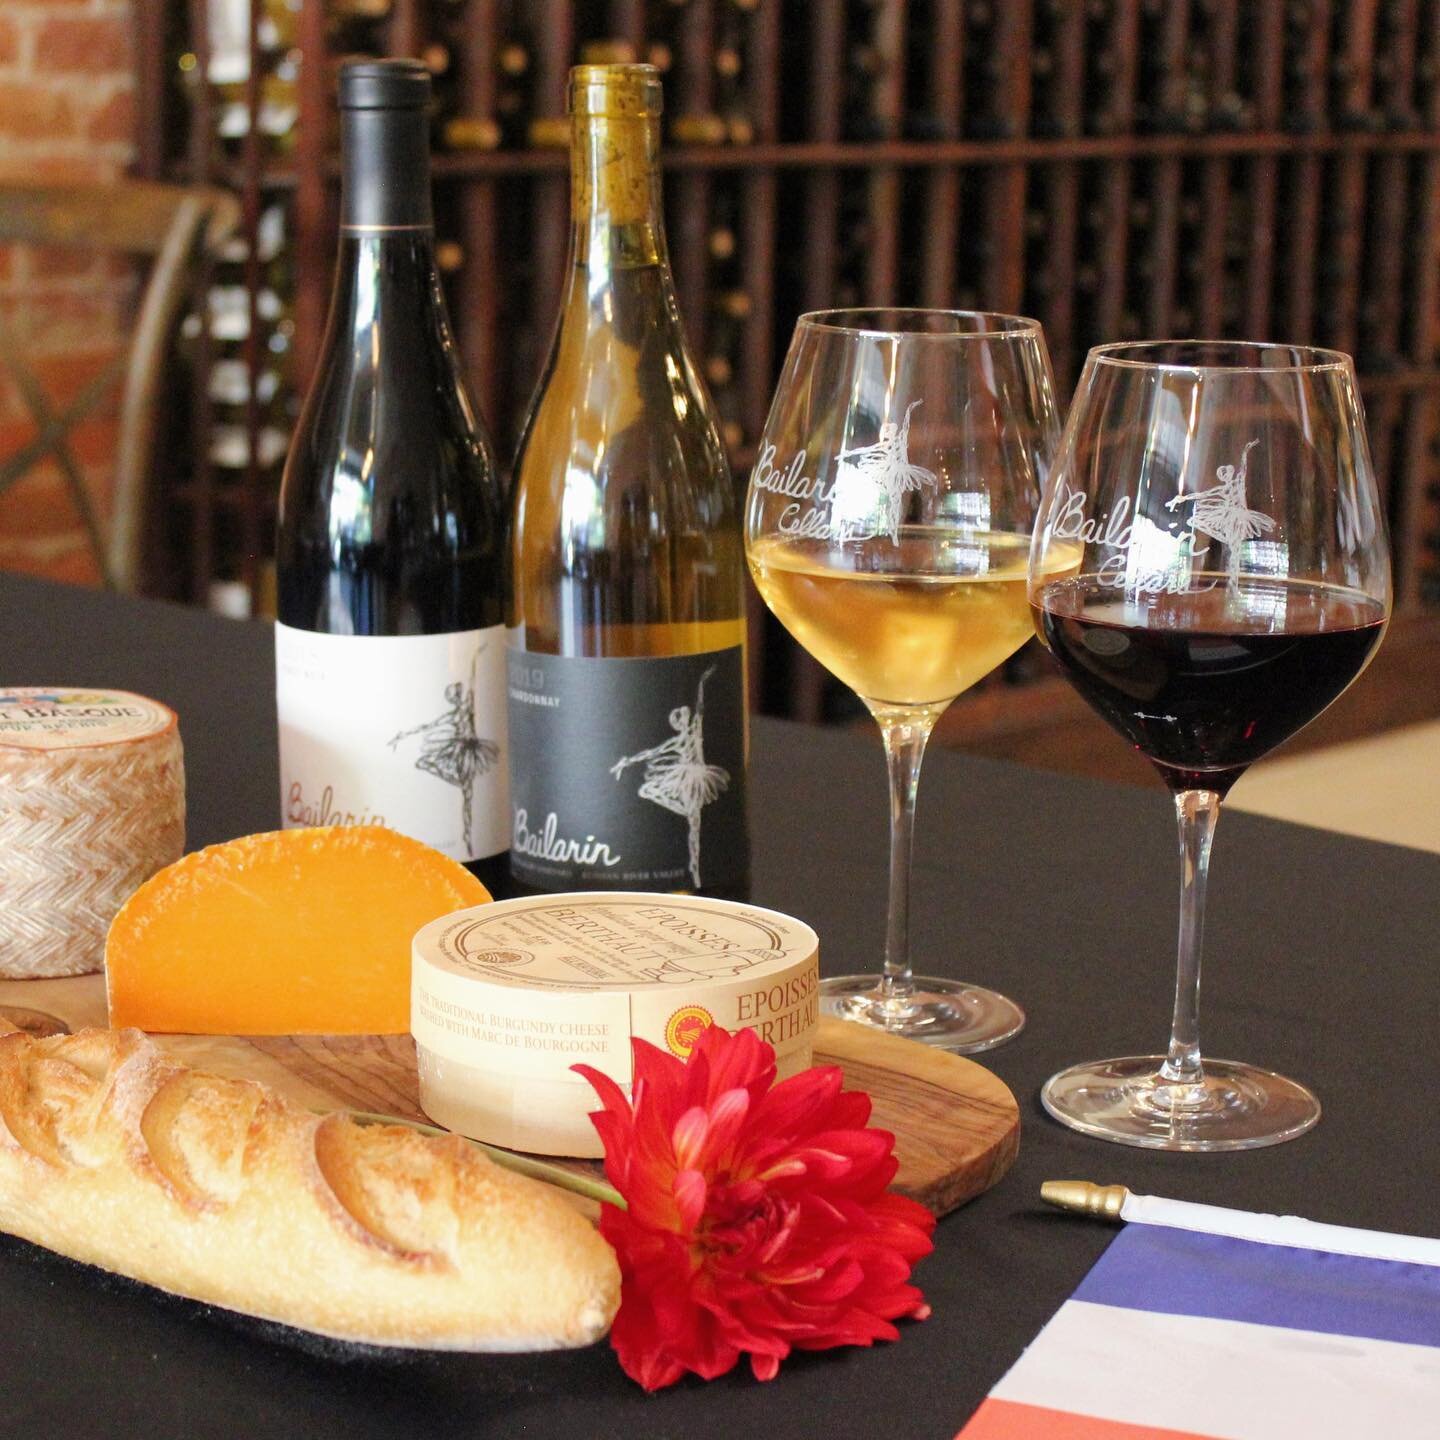 Indulge in the essence of France this Bastille Day, July 14th 🇫🇷🍷

Unwind on our patio with a glass of exquisite wine and delight in a trio of authentic French cheeses! 

#bailarincellars #whatmakesyoudance #bastilleday #winery